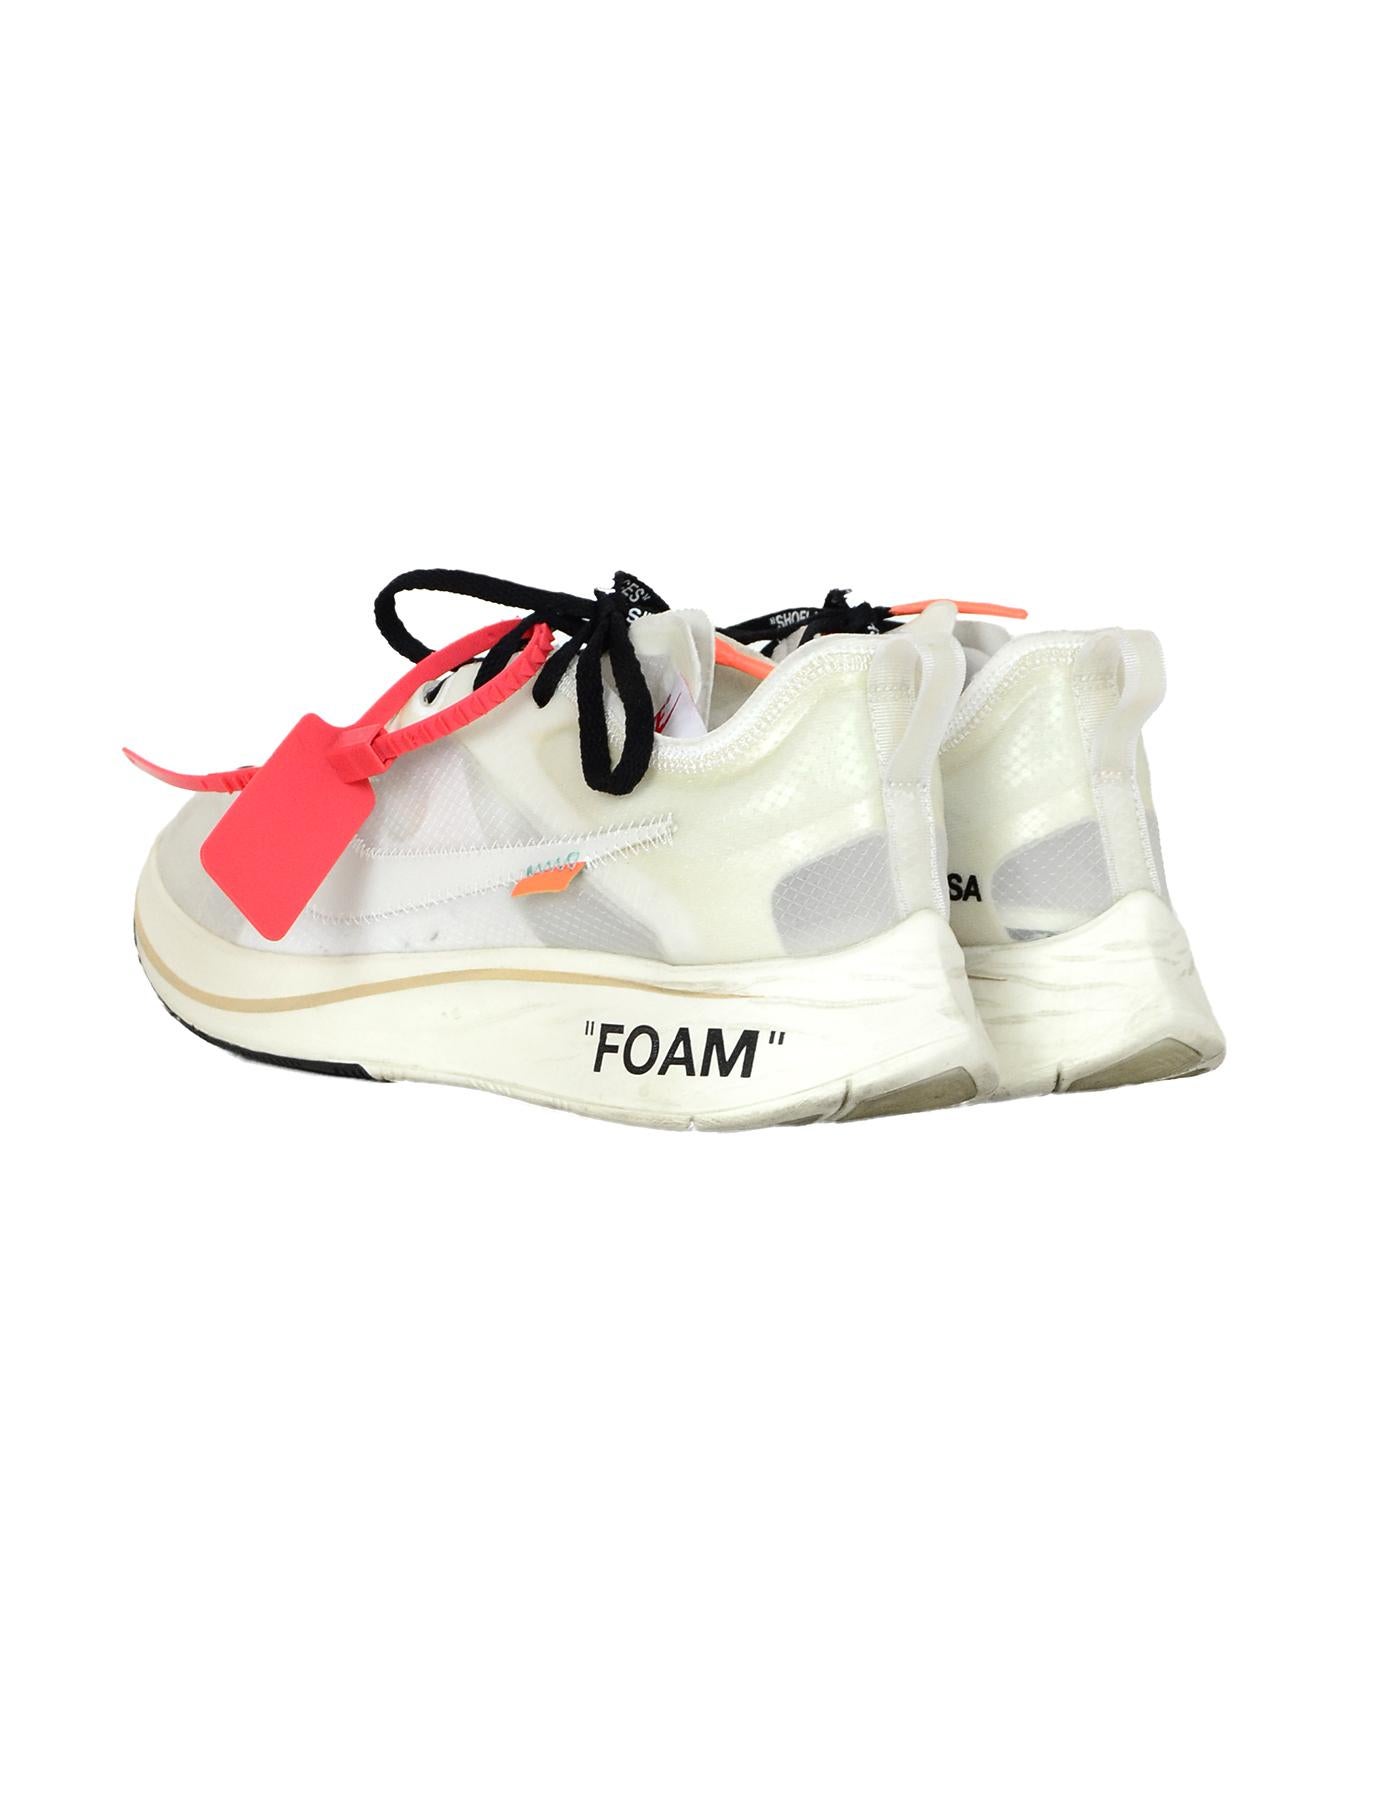 Nike x Off-White Men's Muslin 2017 Zoom Fly Promo/Sample Sneakers Sz 10 In Excellent Condition In New York, NY